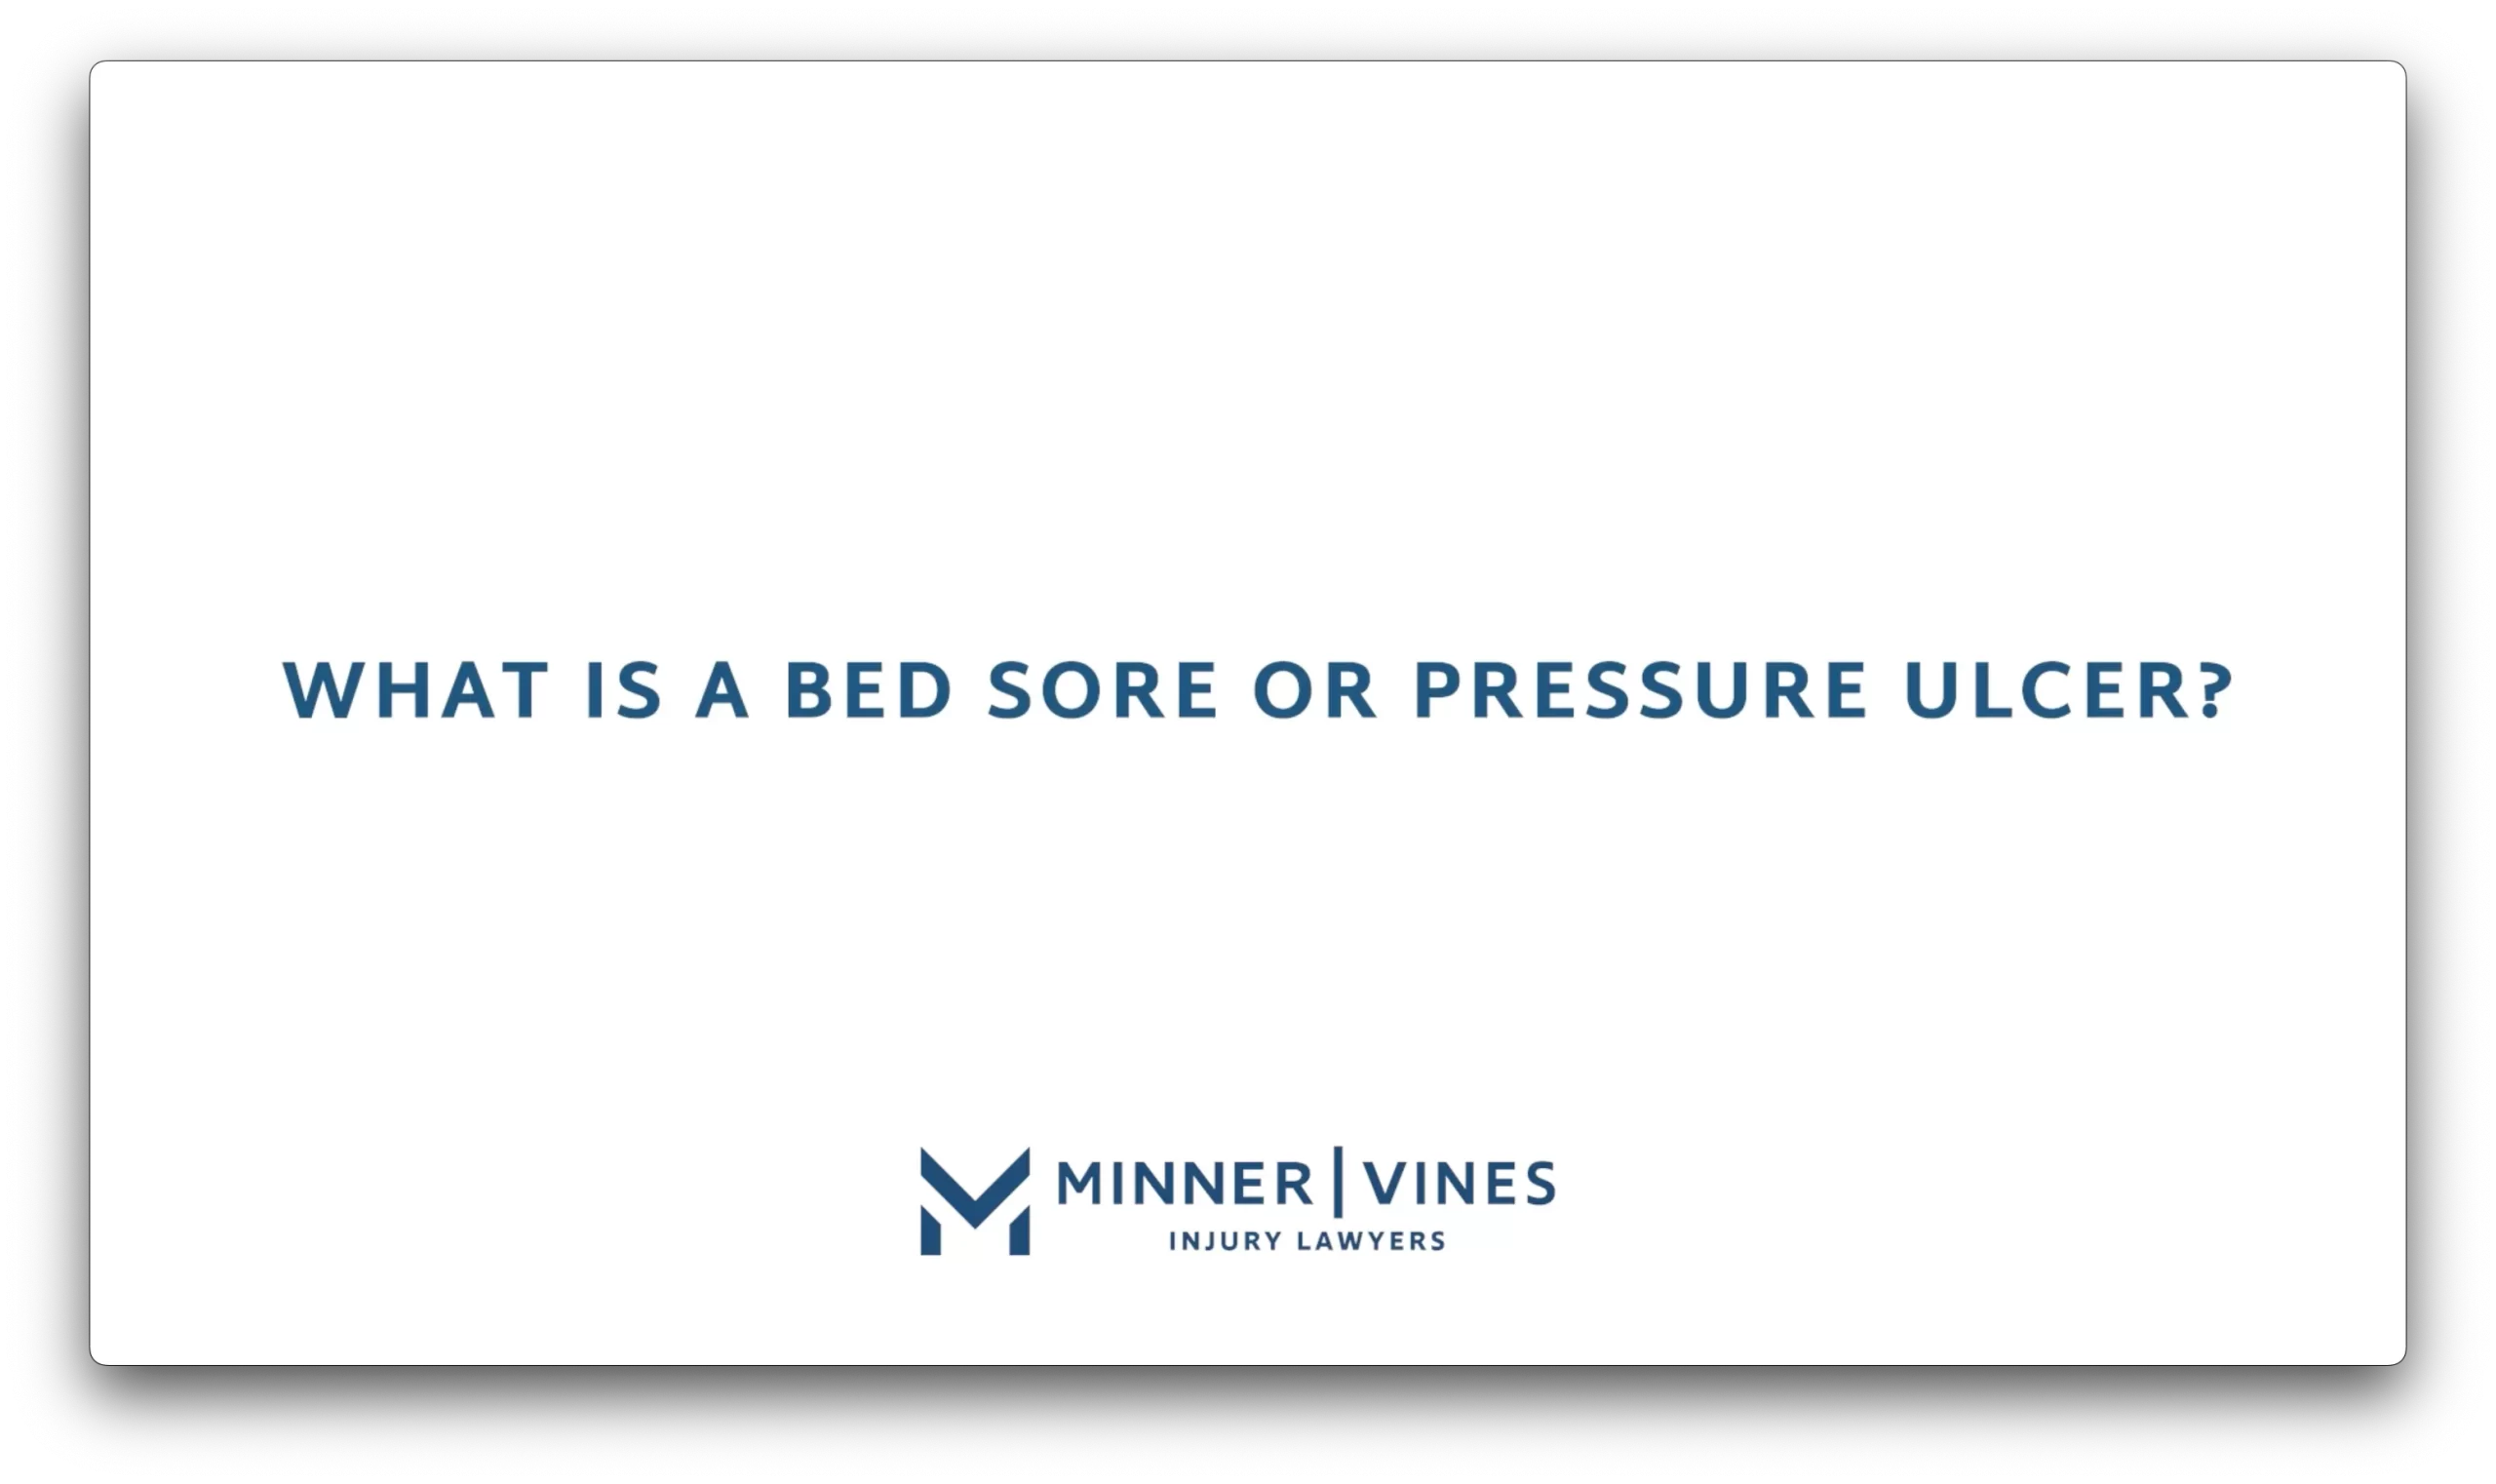 What is a bed sore or pressure ulcer?